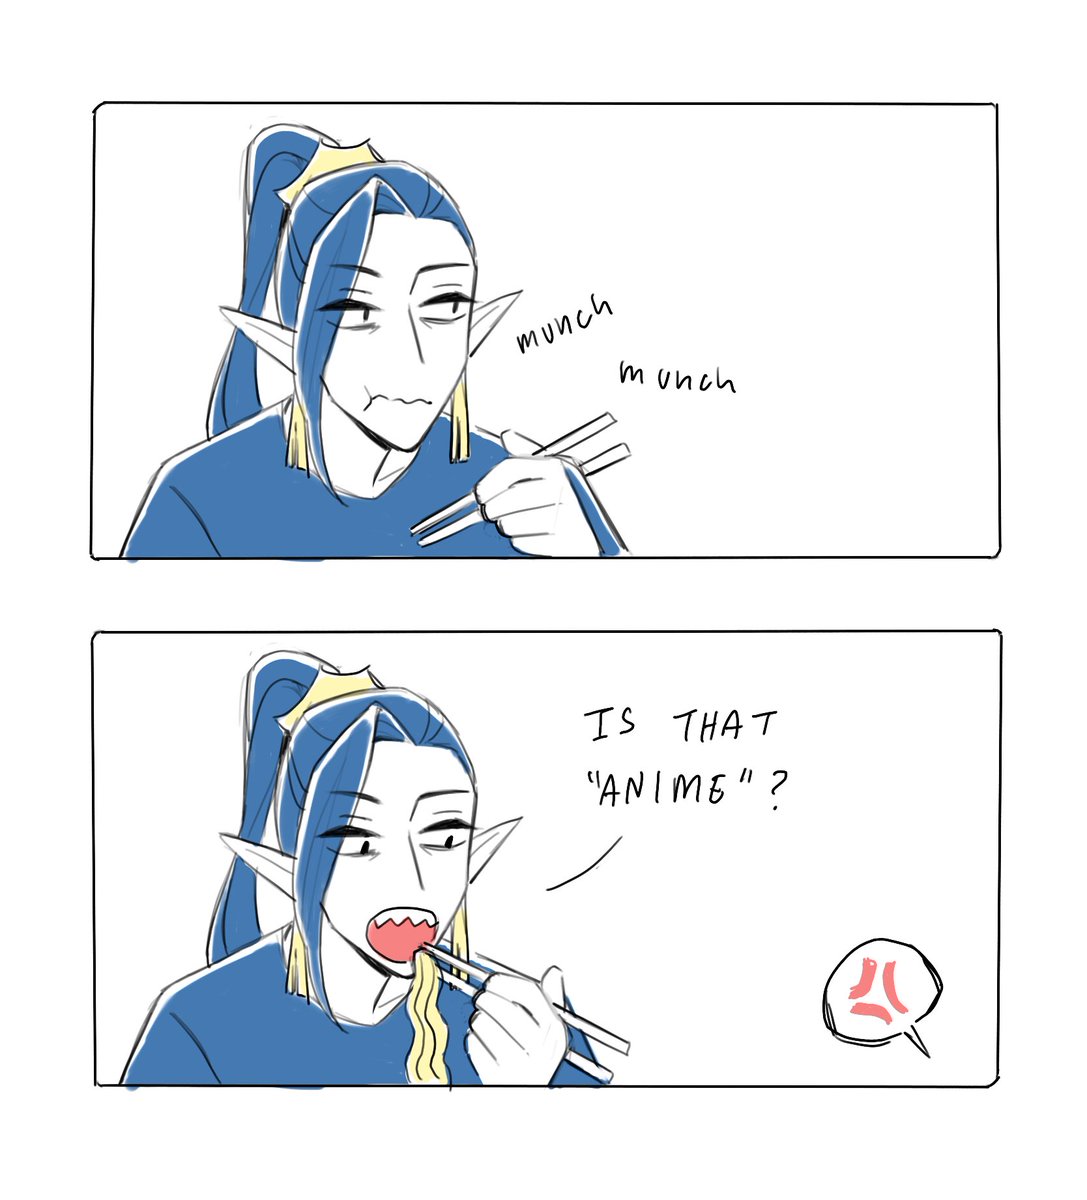 by far my favorite hua cheng character trait is that he's a weird art kid 